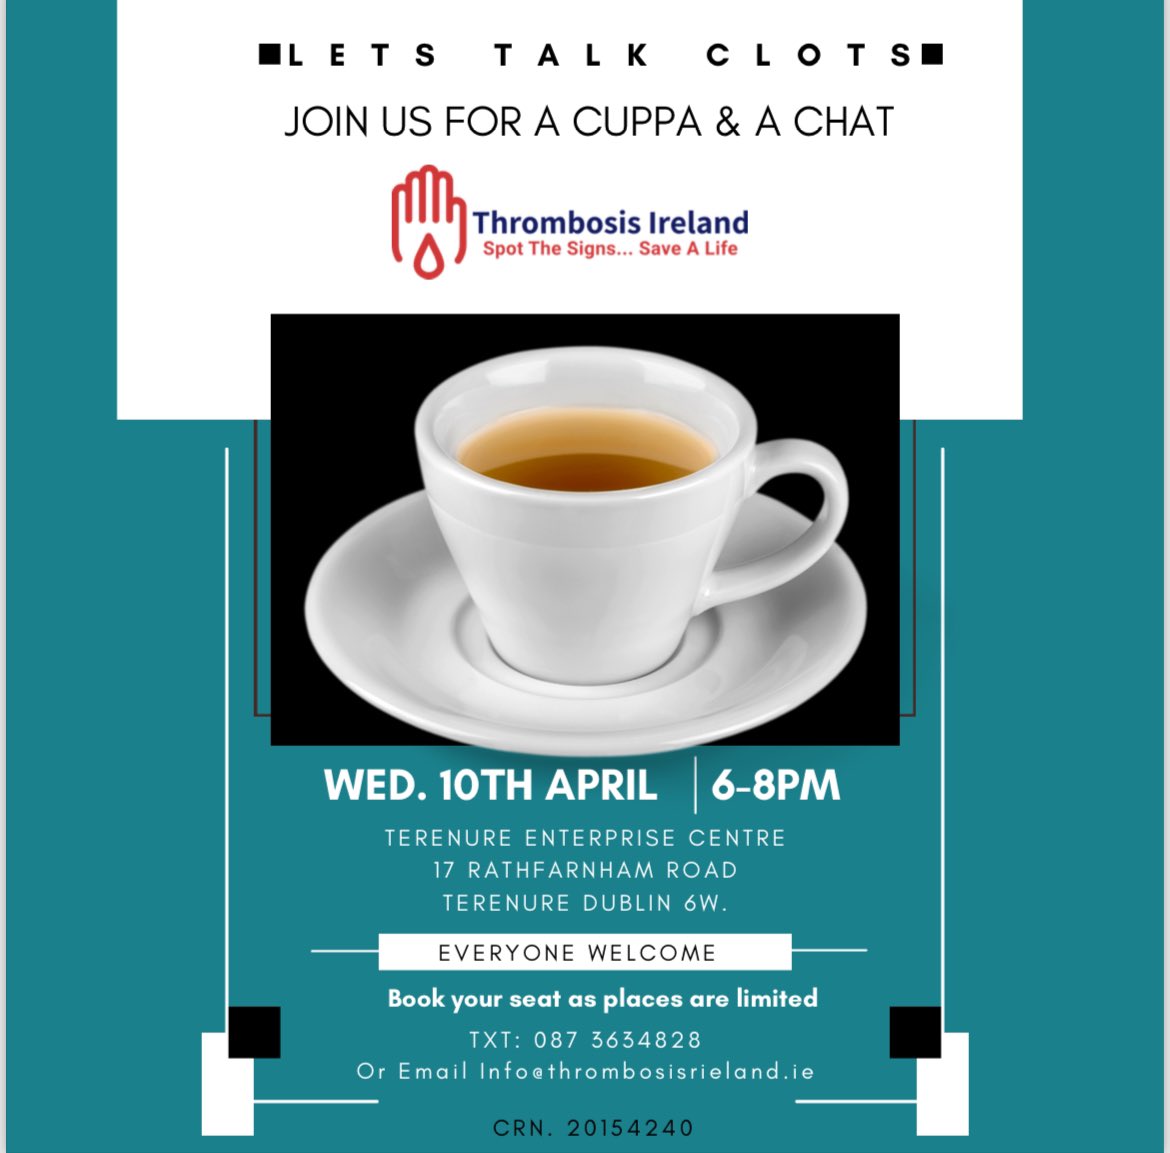 Have you been diagnosed with blood clots? Are you seeking support or information? Join us for a cuppa & a chat on Wednesday 10th April, 6-8pm. Booking essential. Txt 087 363 4828 or email Info@thrombosisireland.ie @thrombosisday @NVTEProgramme @IEHospitalGroup @DMHospitalGroup